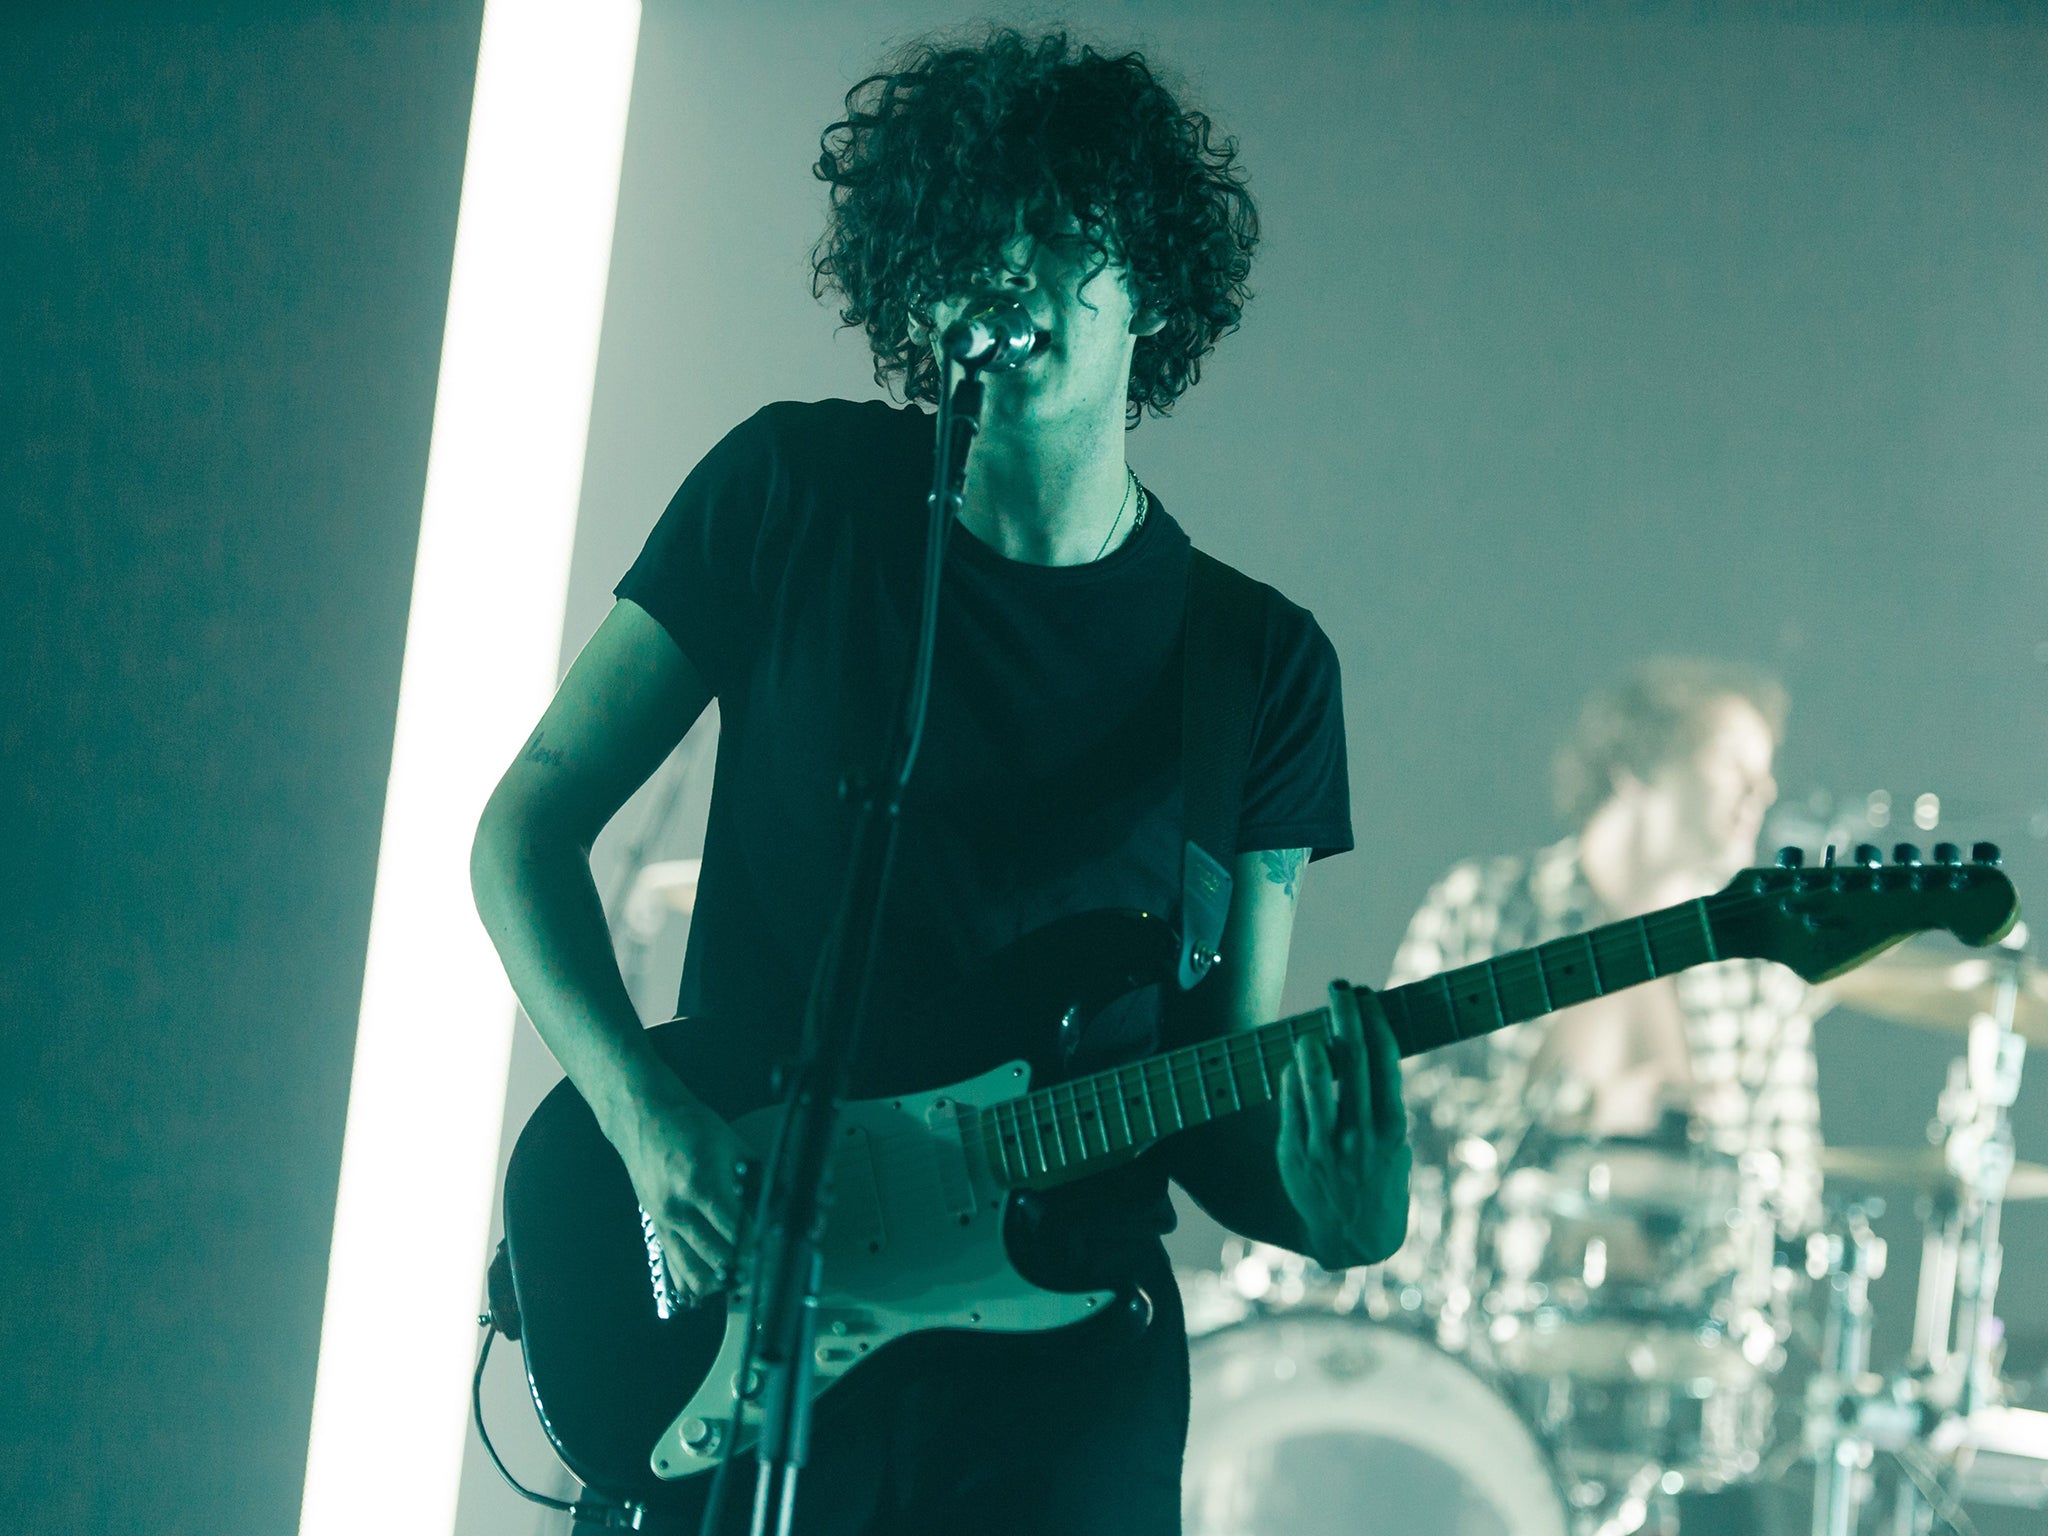 The 1975 singer Matt Healy's appeal to his teenage fans has been unfairly dismissed by many critics